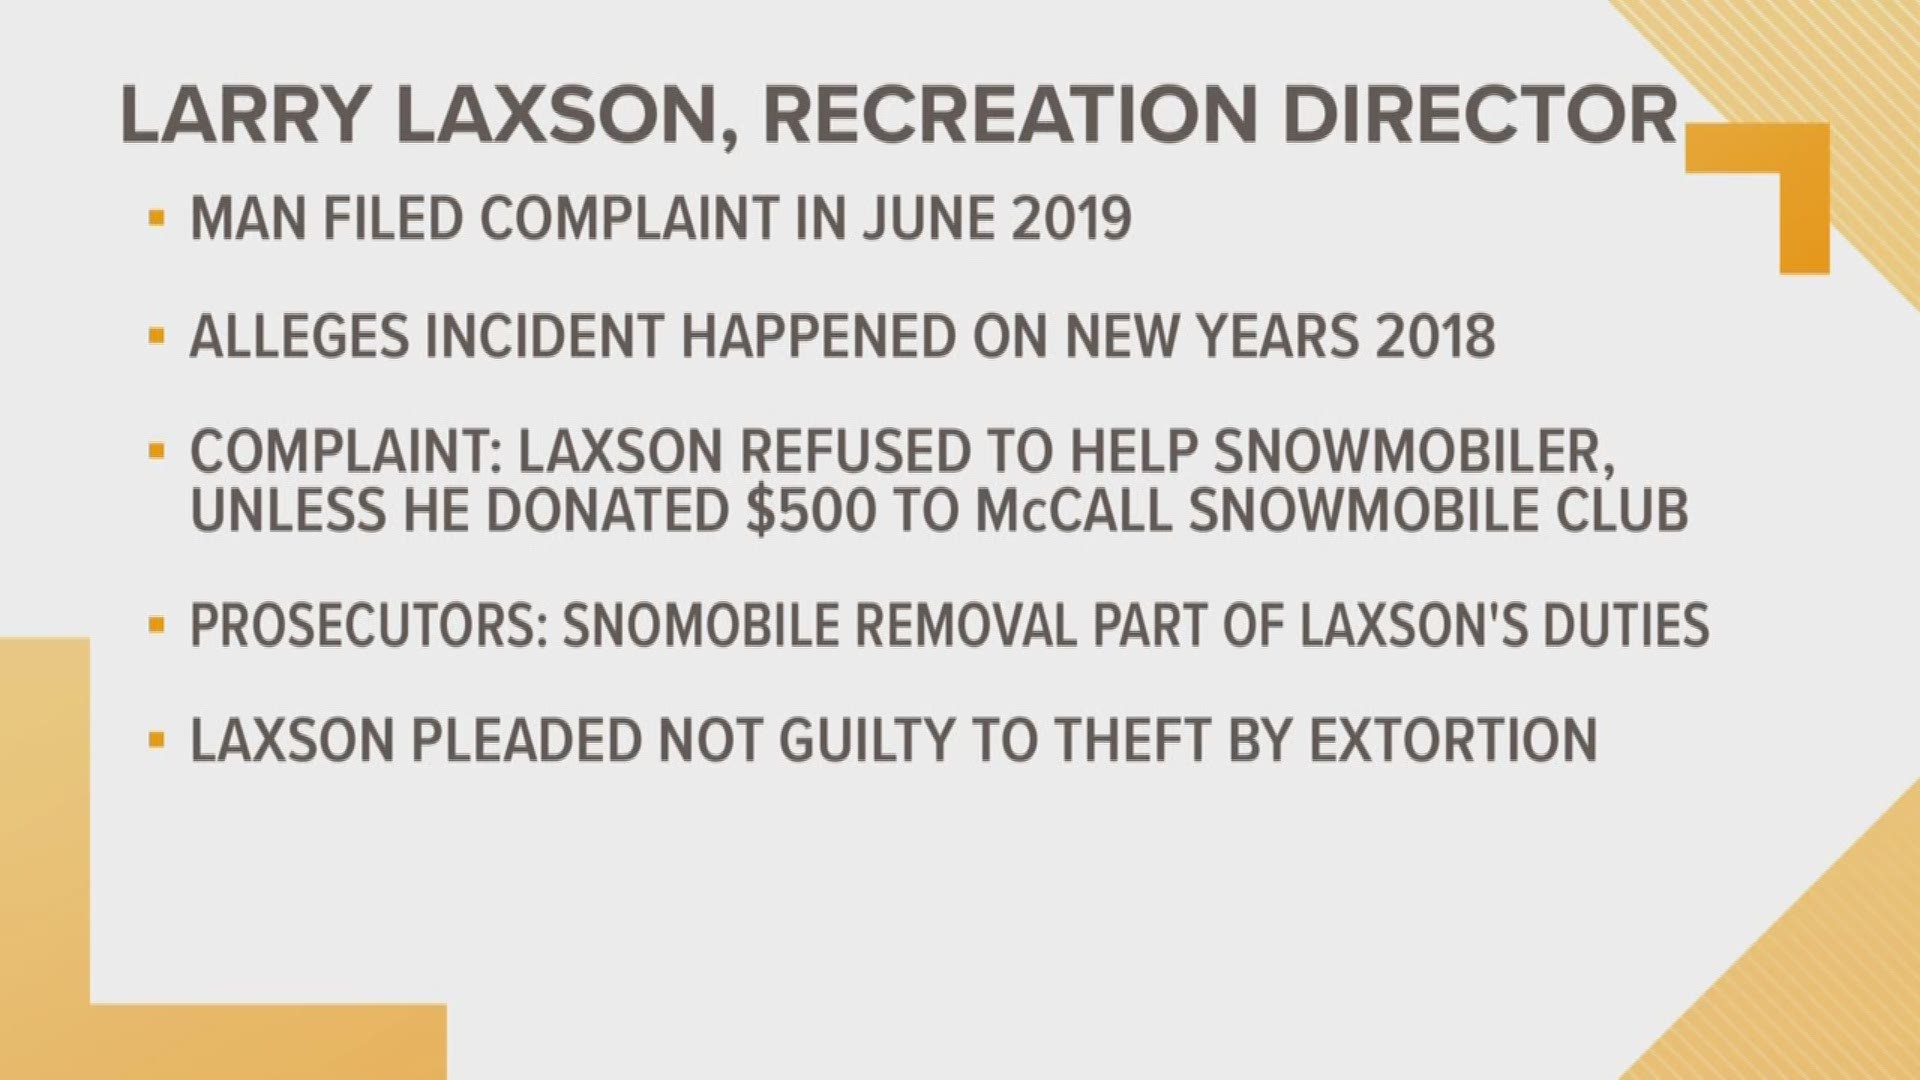 A Valley County employee is facing a criminal charge after investigators say he demanded a $500 donation before he would help a man whose snowmobile was stuck on a trail. Valley County Recreation Director Larry Laxson was charged in June with a misdemeanor count of theft by extortion.